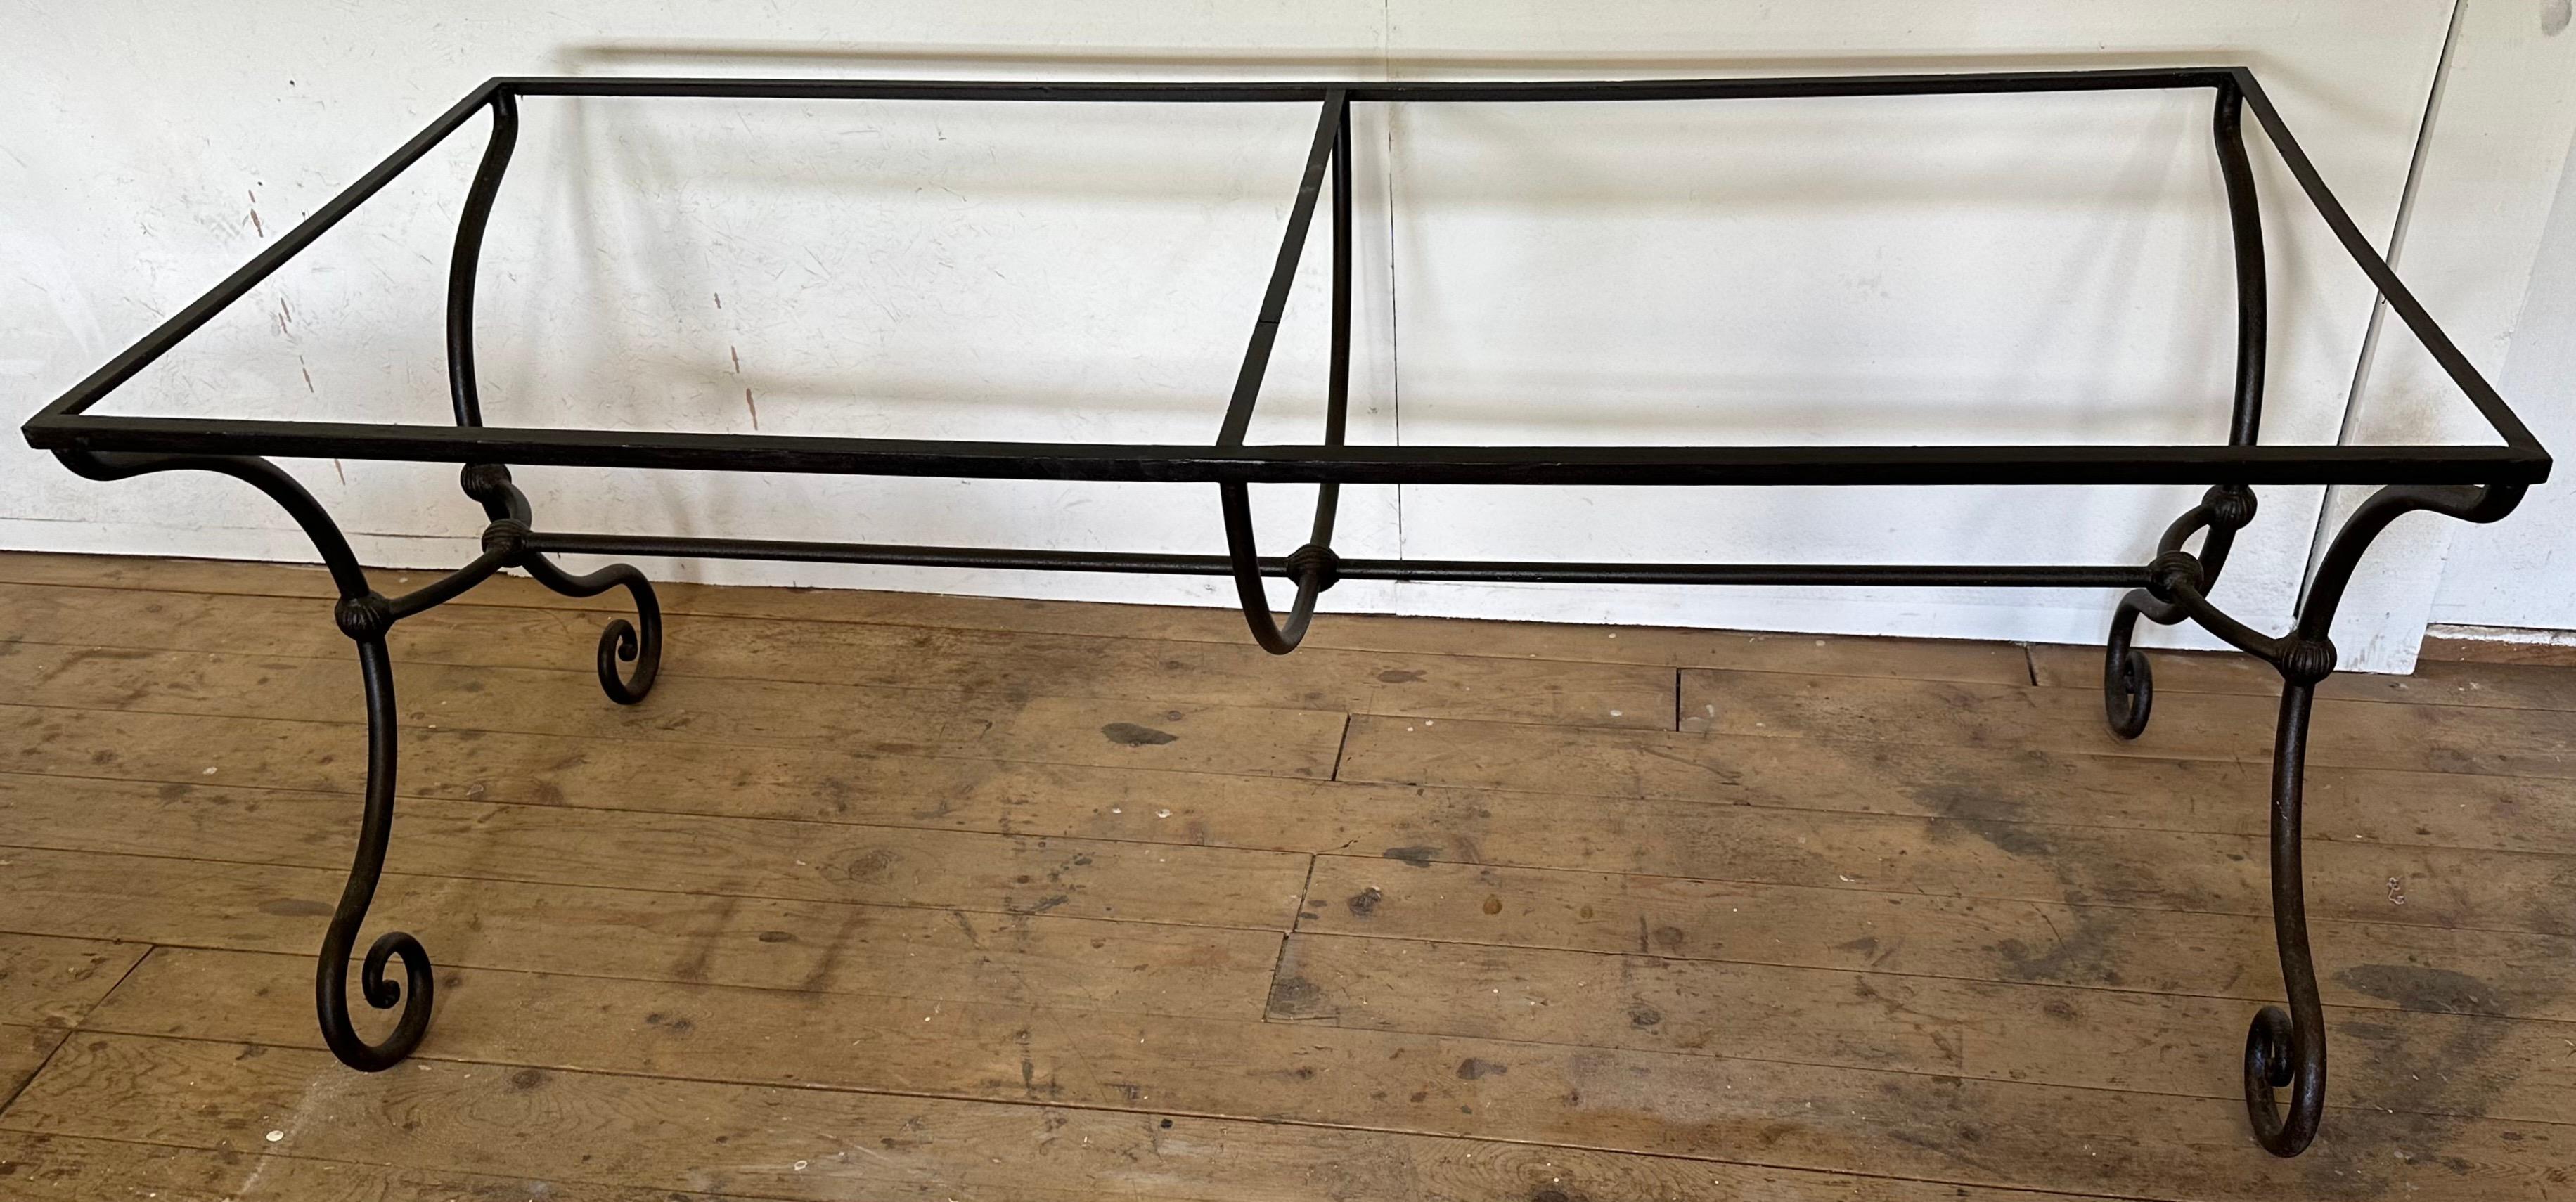 A striking and most decorative French mid-century wrought iron base with elegantly scrolled curved legs at either end, connected by a stretcher that will hold a top of your choice be it stone, wood or glass.
Depending on the size of table top, the